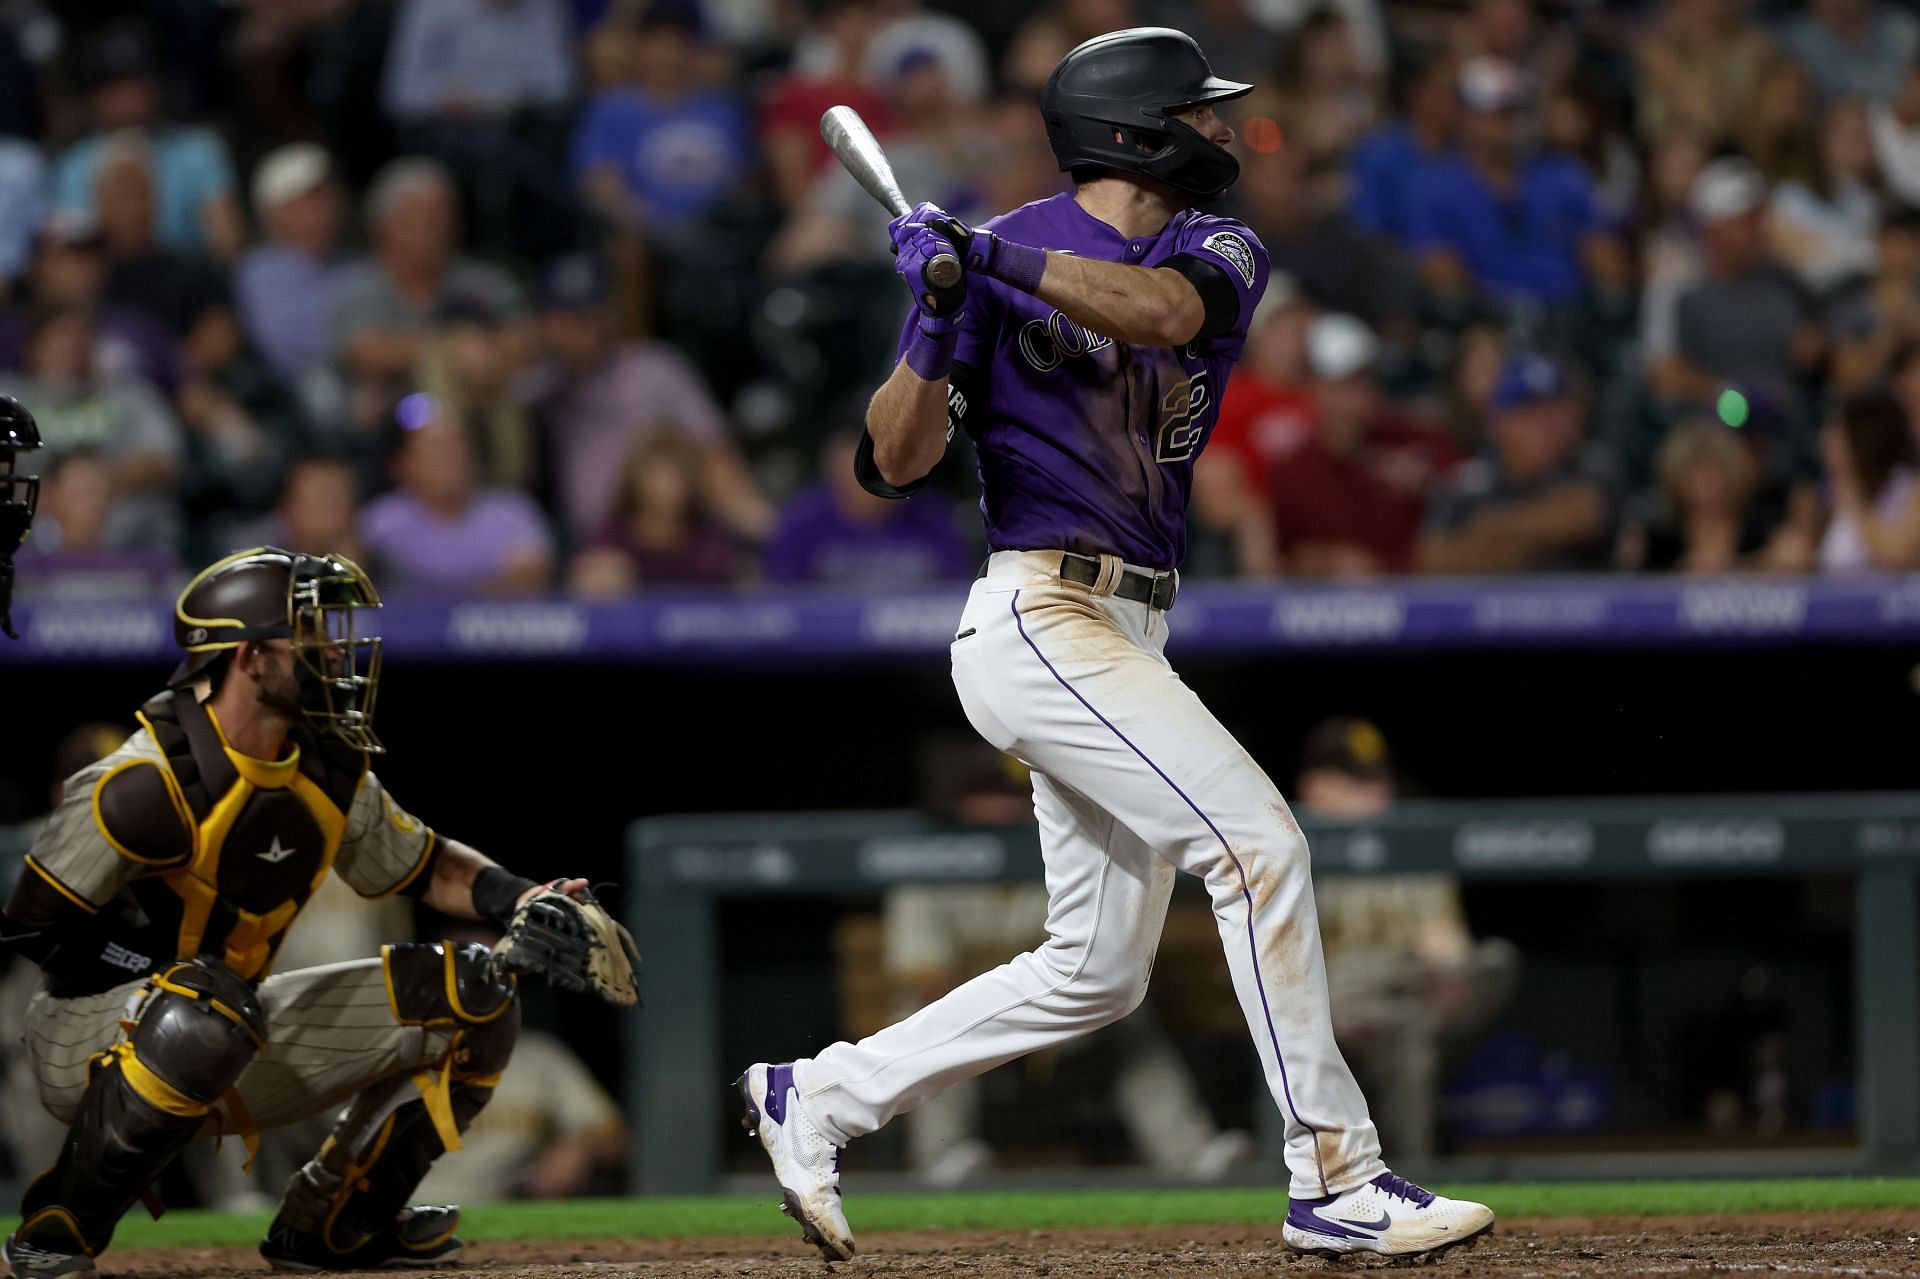 The Rockies defeated the Padres Thursday, 8-5.